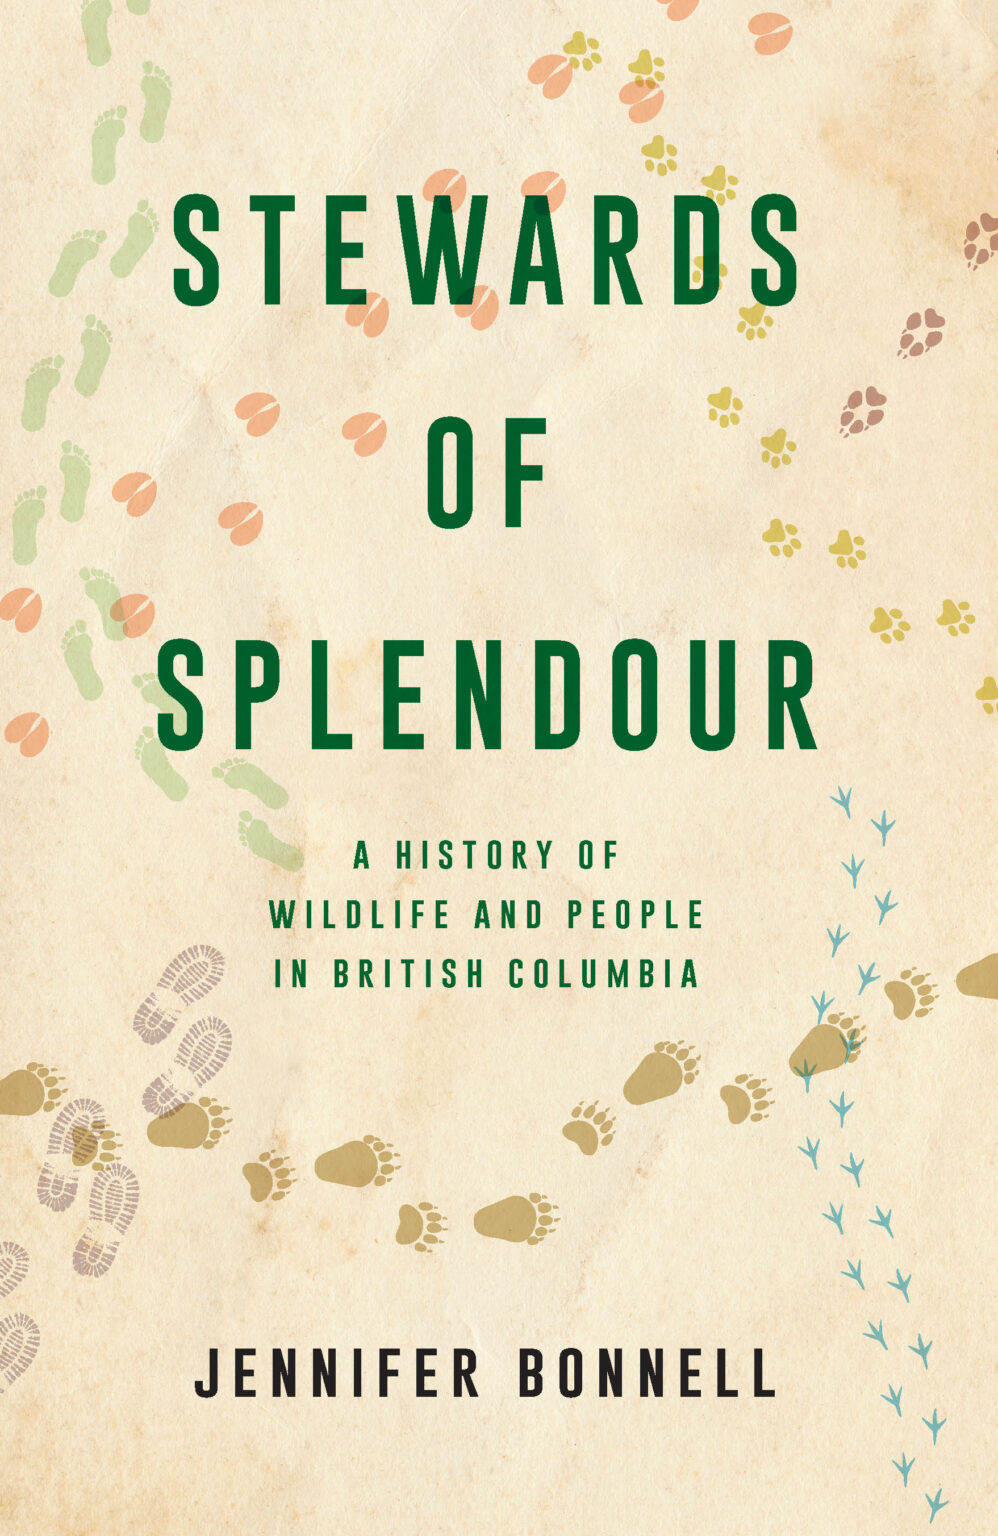 Stewards of Splendour: A History of Wildlife and People in British Columbia